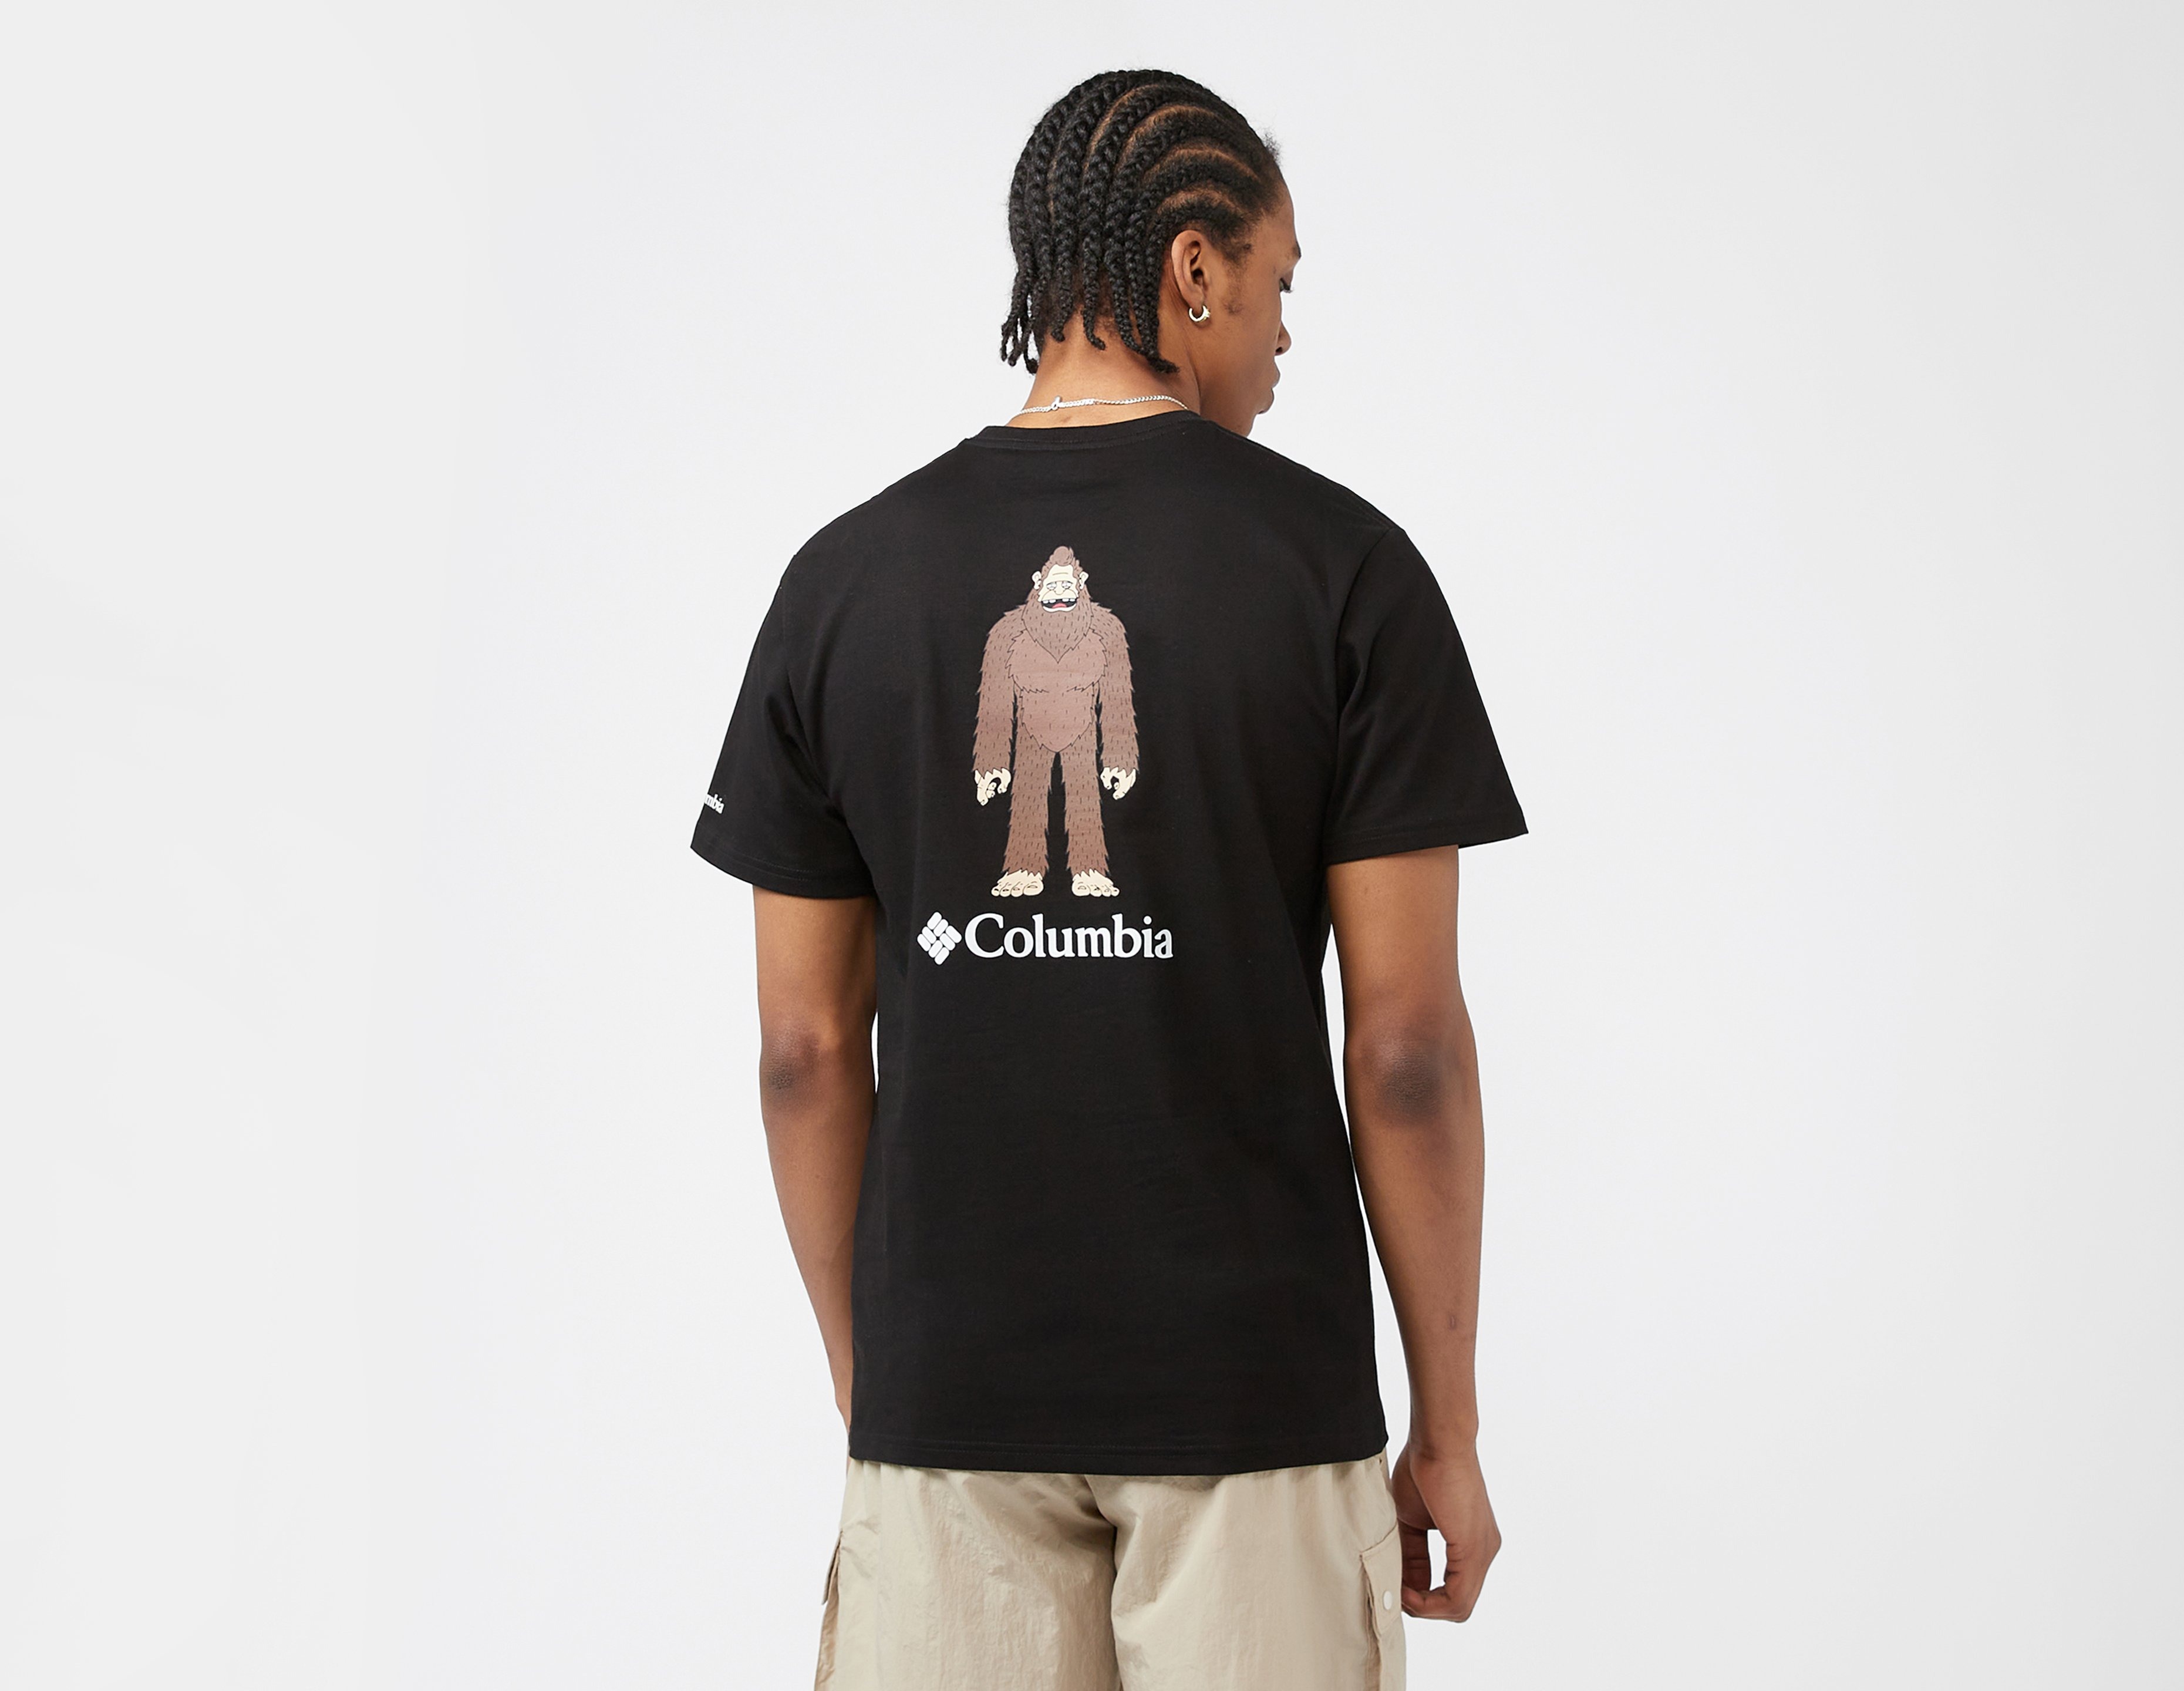 POCKETS Shirt - - WITH T Black | Bigfoot STUSSY Standing ?exclusive Columbia - T-SHIRT Healthdesign?